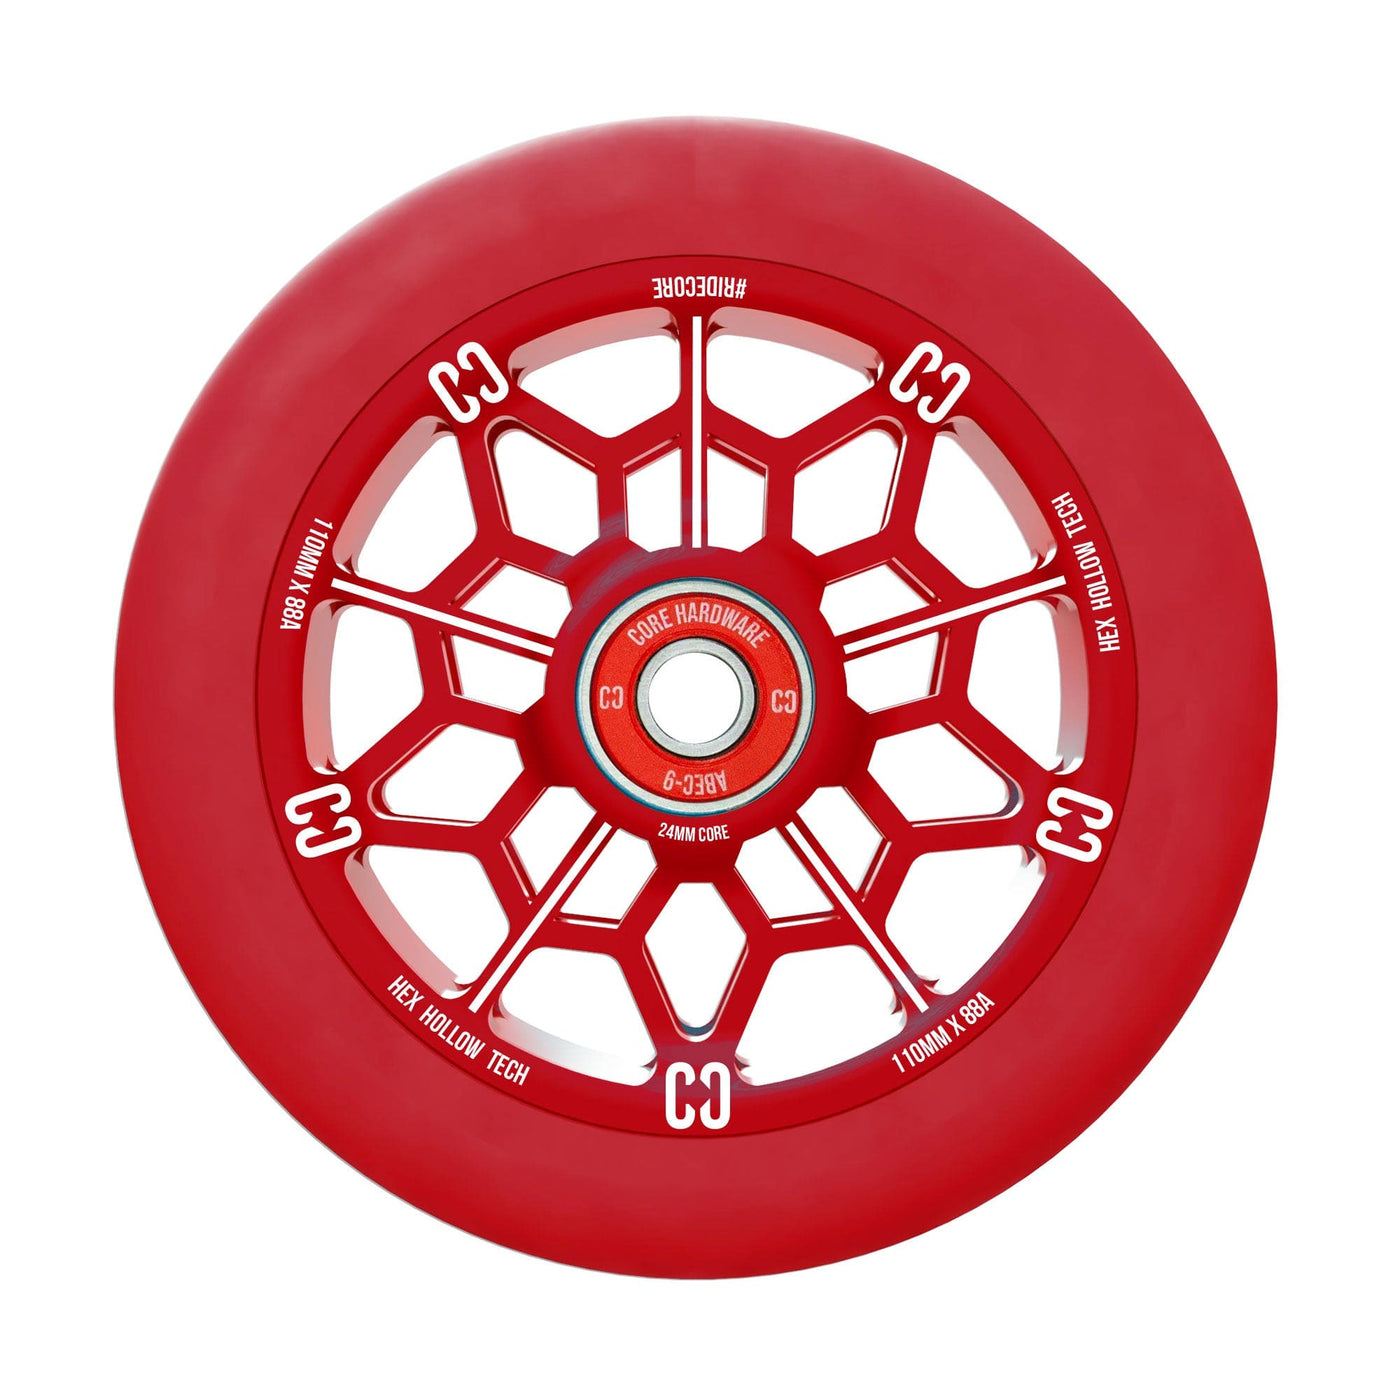 CORE Hex Hollow Stunt Red Scooter Wheel 110mm I Scooter Wheel Alternate Side